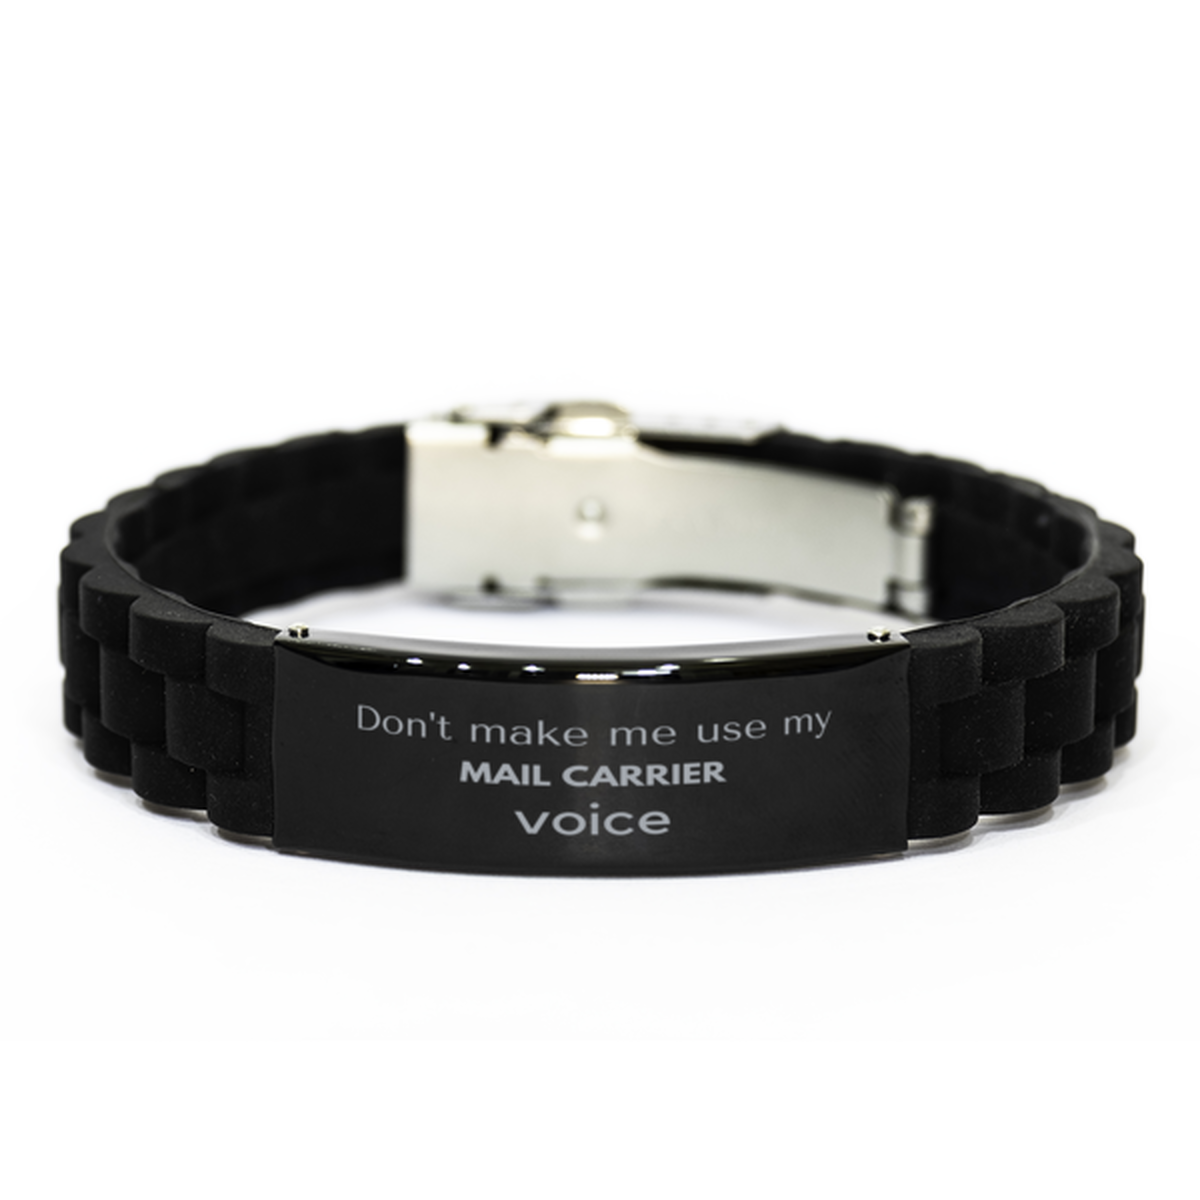 Don't make me use my Mail Carrier voice, Sarcasm Mail Carrier Gifts, Christmas Mail Carrier Black Glidelock Clasp Bracelet Birthday Unique Gifts For Mail Carrier Coworkers, Men, Women, Colleague, Friends